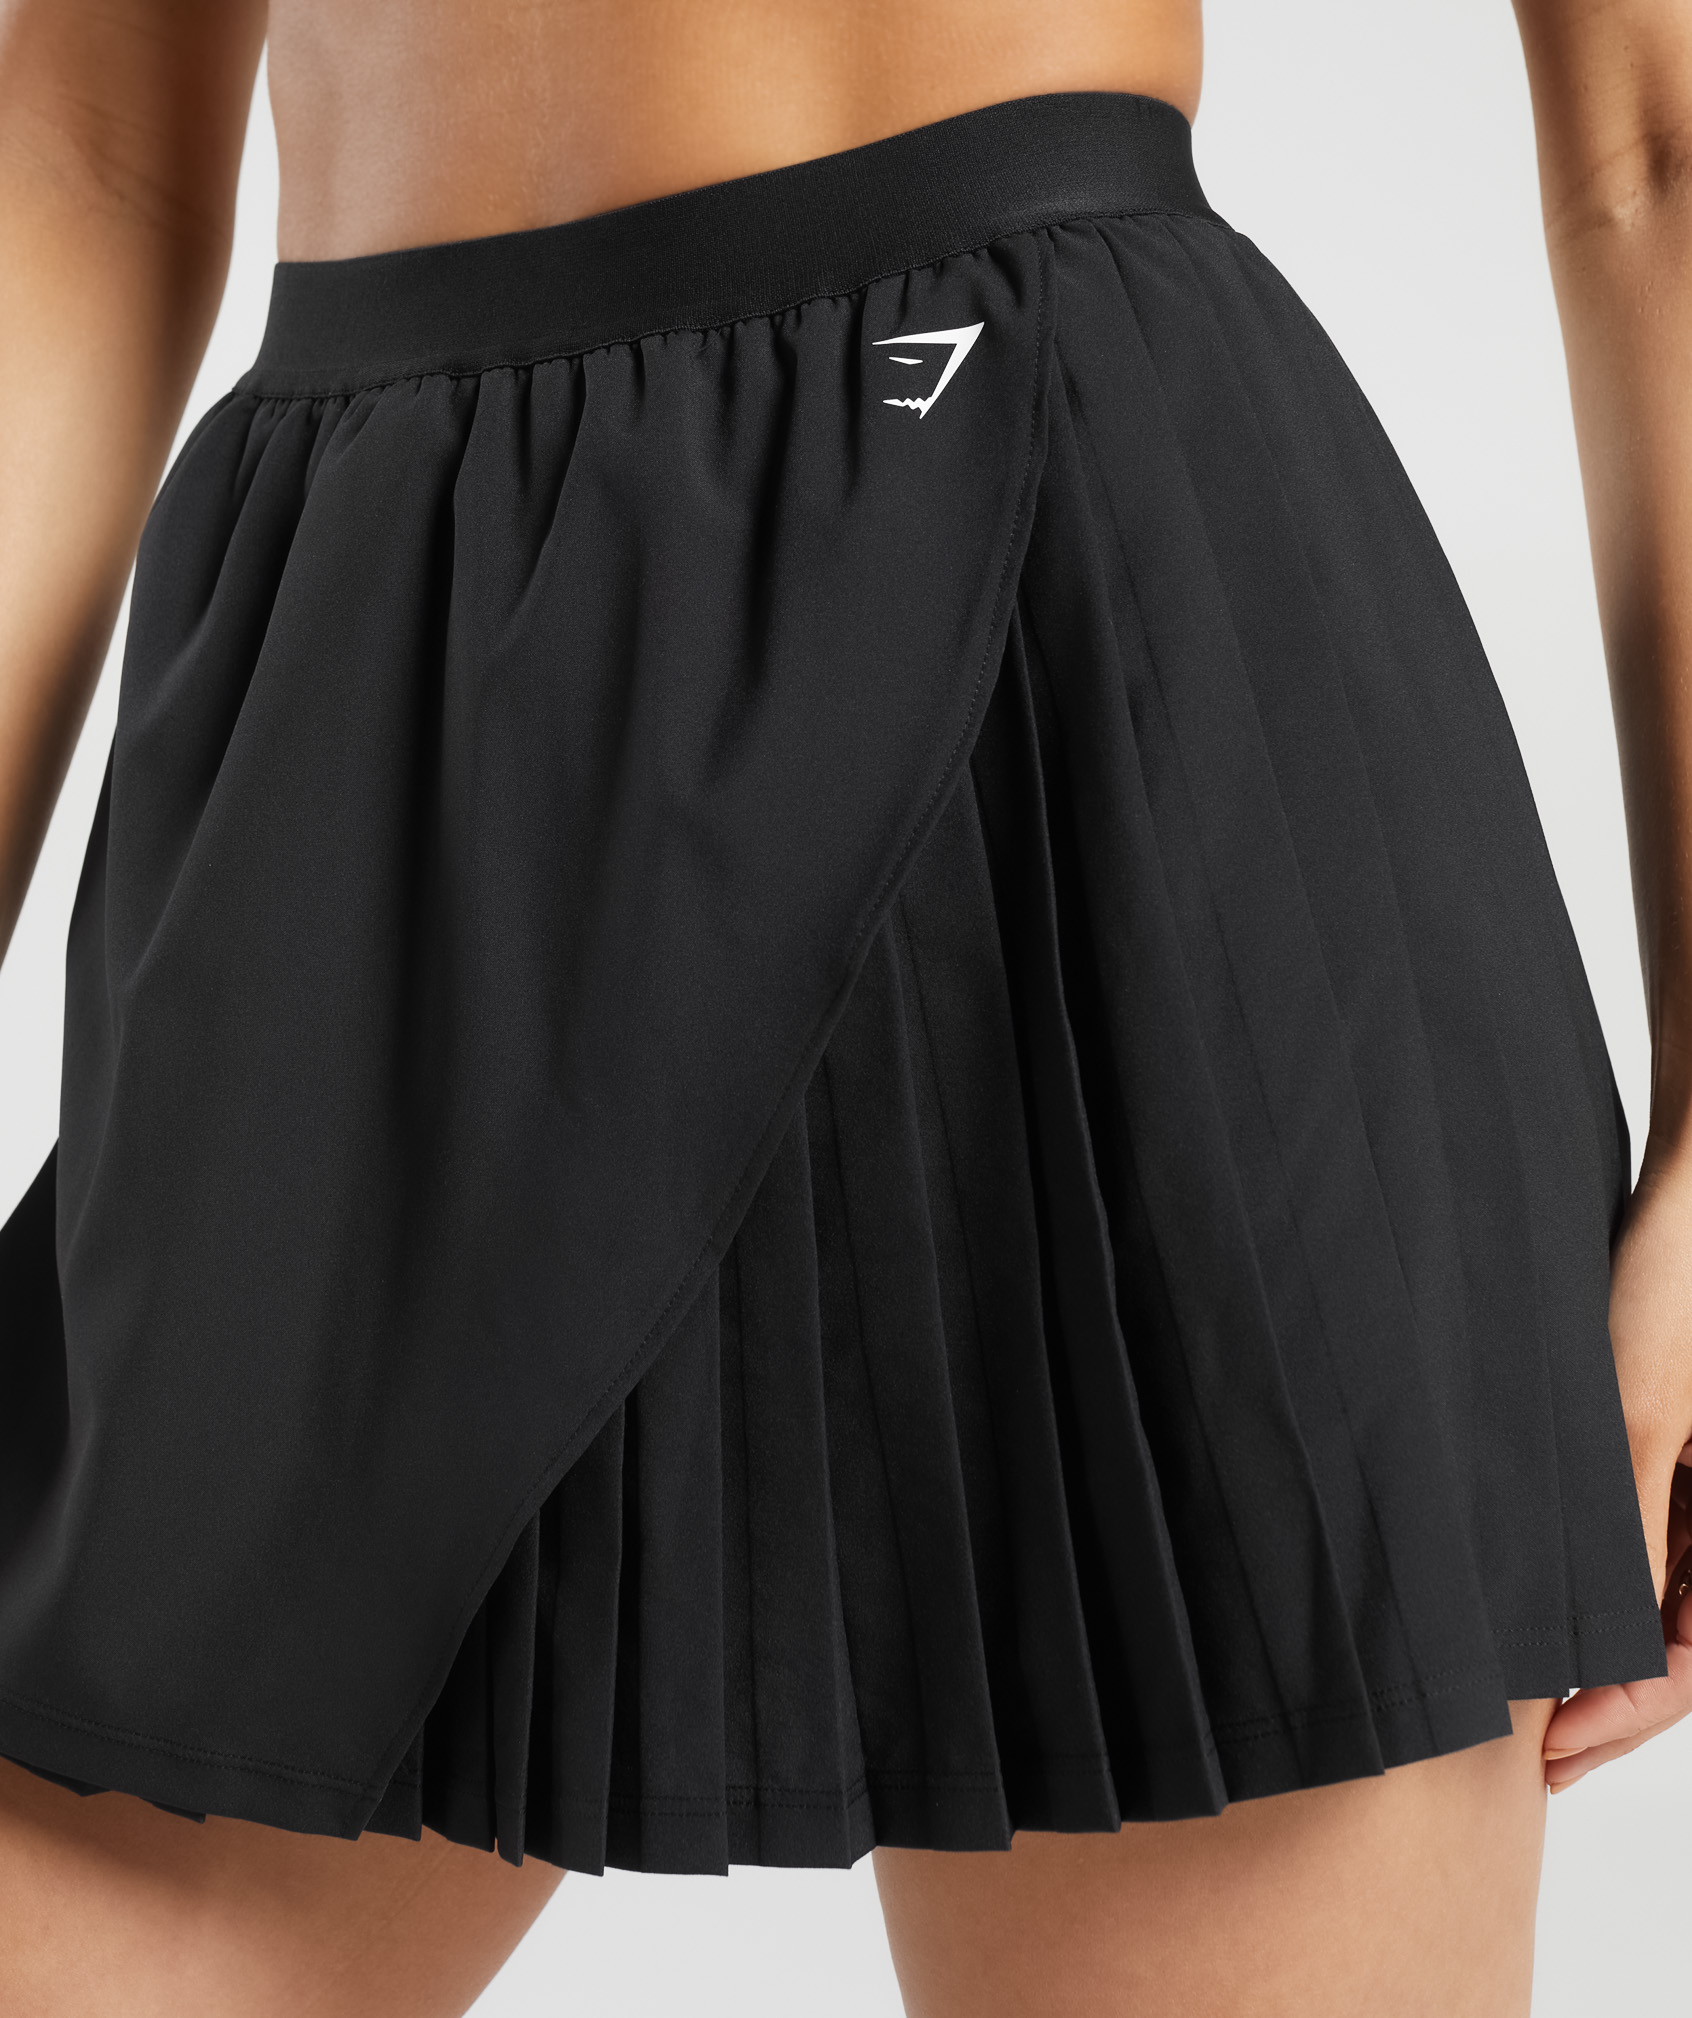 Tennis Skirt Outfits: 6 Ways to Style Tennis Skirts - 2024 - MasterClass